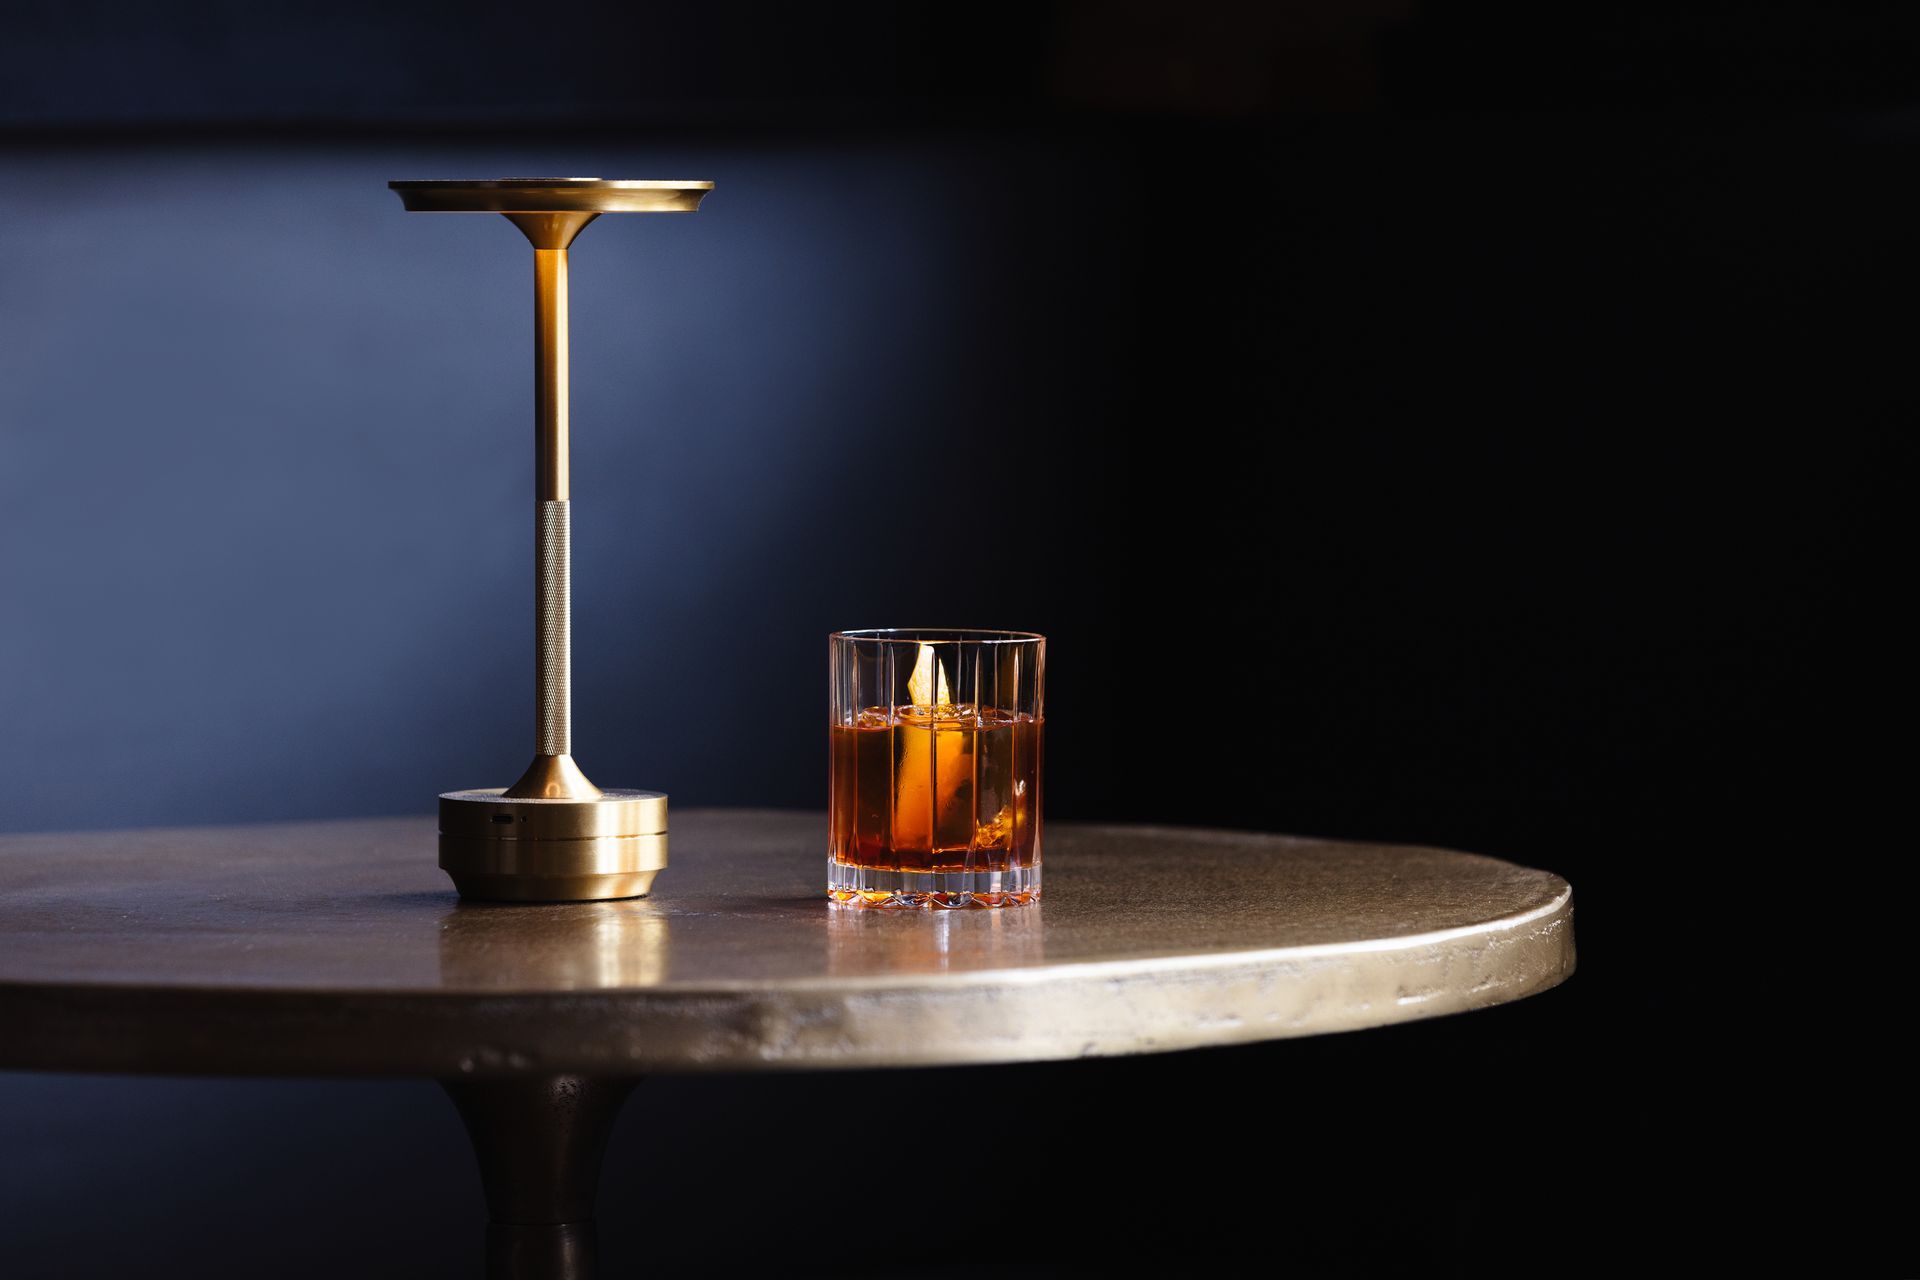 A glass of whiskey sits on a table next to a lamp